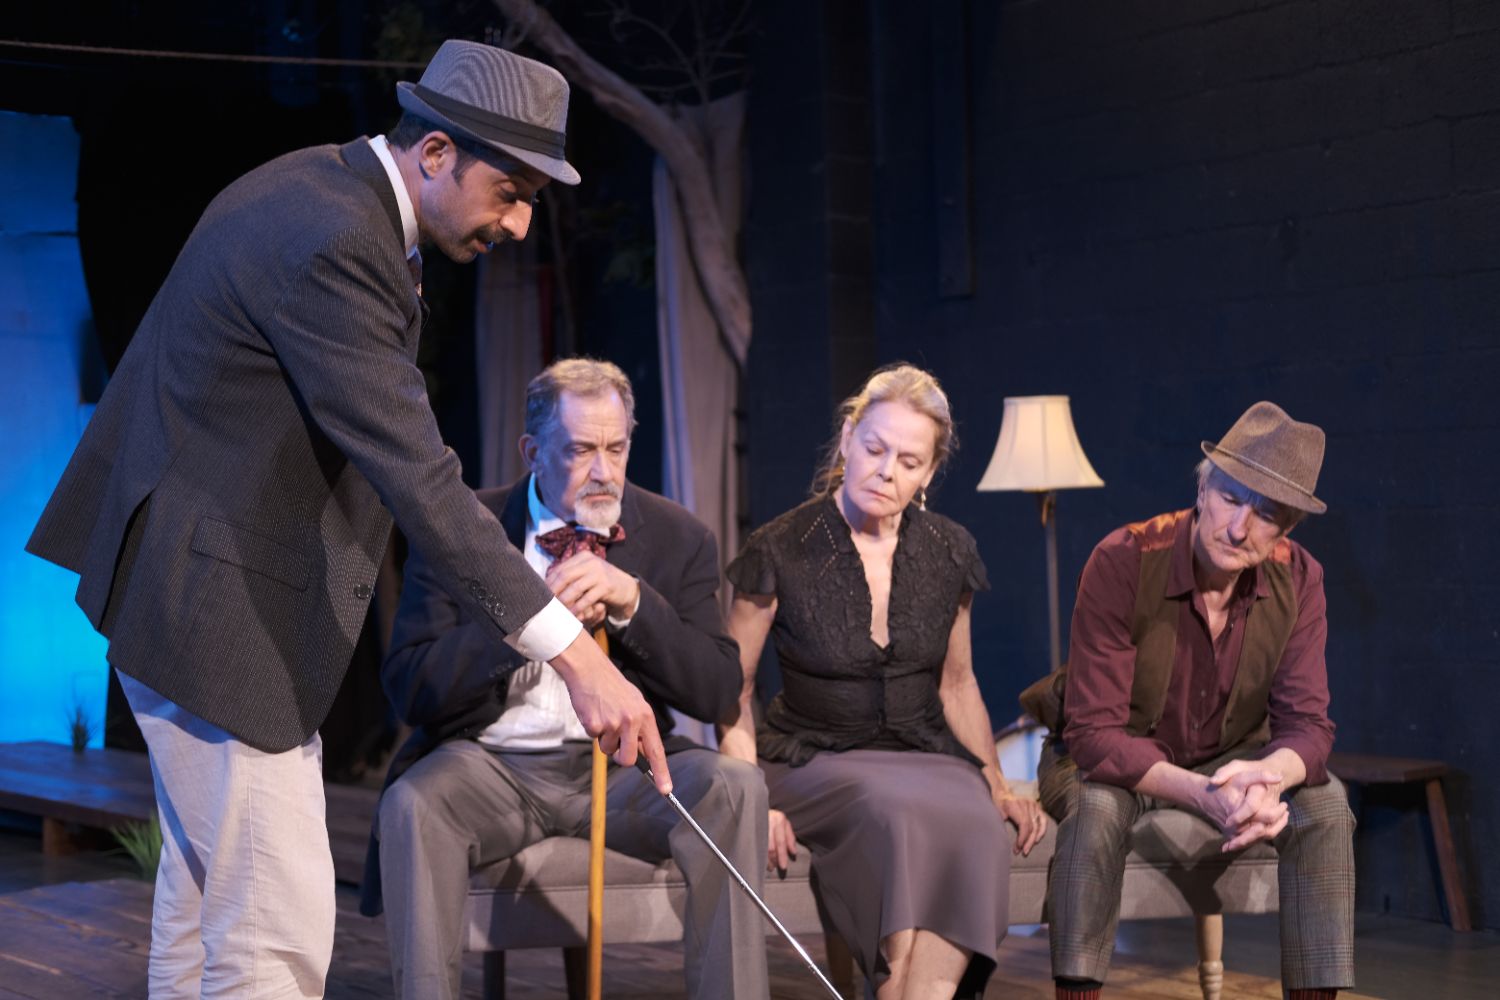 PHOTO: Jack Serra | The South Pasadenan | Hossein Mardani, Lawrence Novikoff, Sally Smythe, and Kevin Michael Moran in The Cherry Orchard at South Pasadena Theatre Workshop